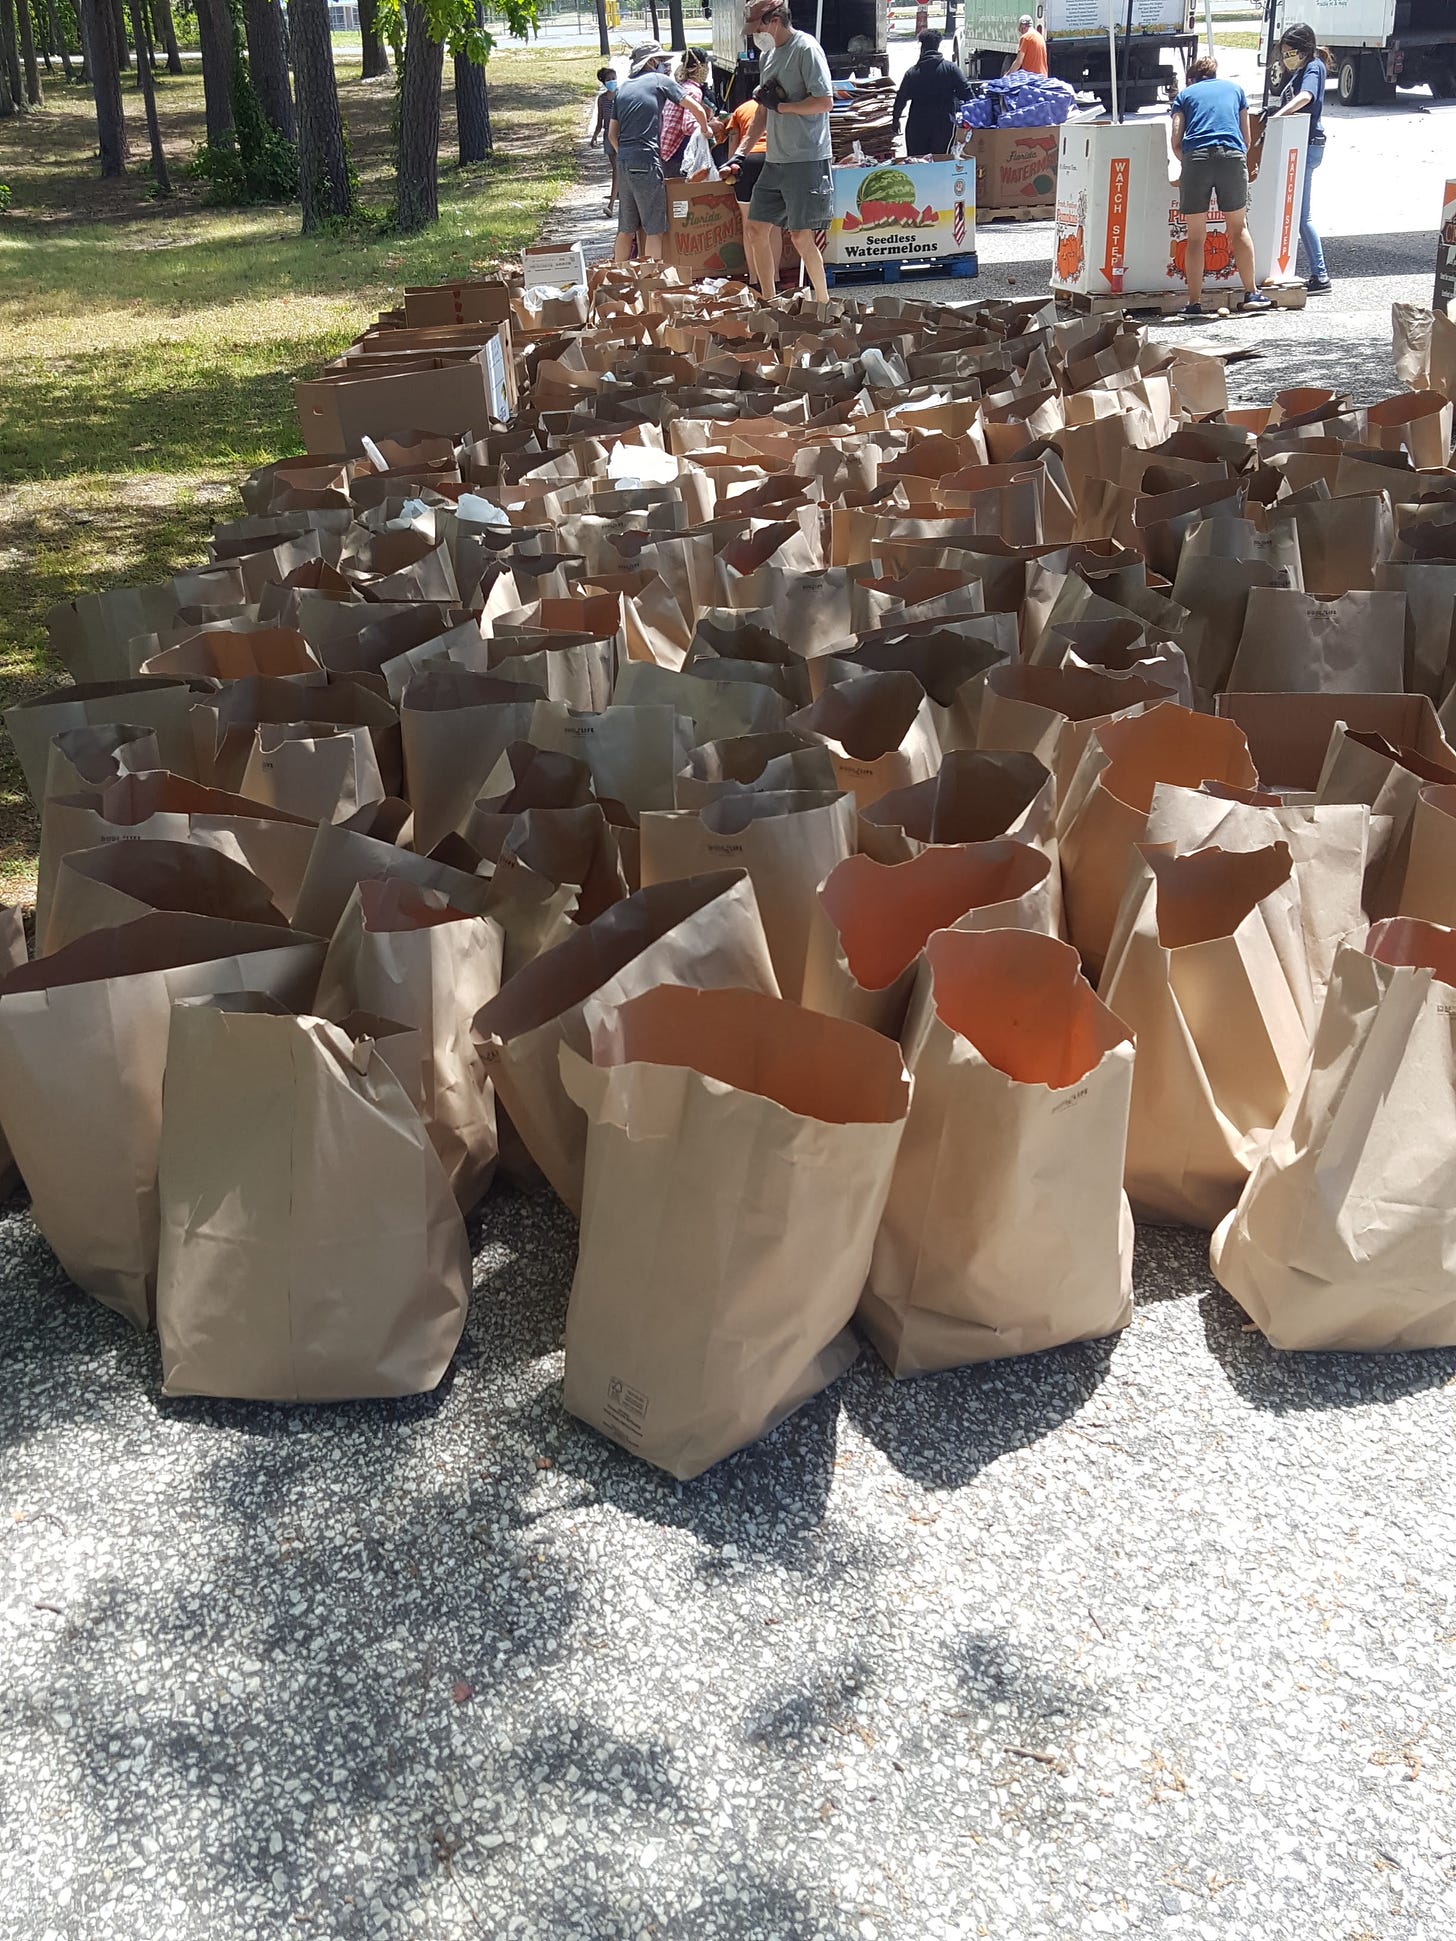 Lots of brown paper bags containing fresh produce to donate to anyone who needs it. In the background are the volunteers who filled the bags.